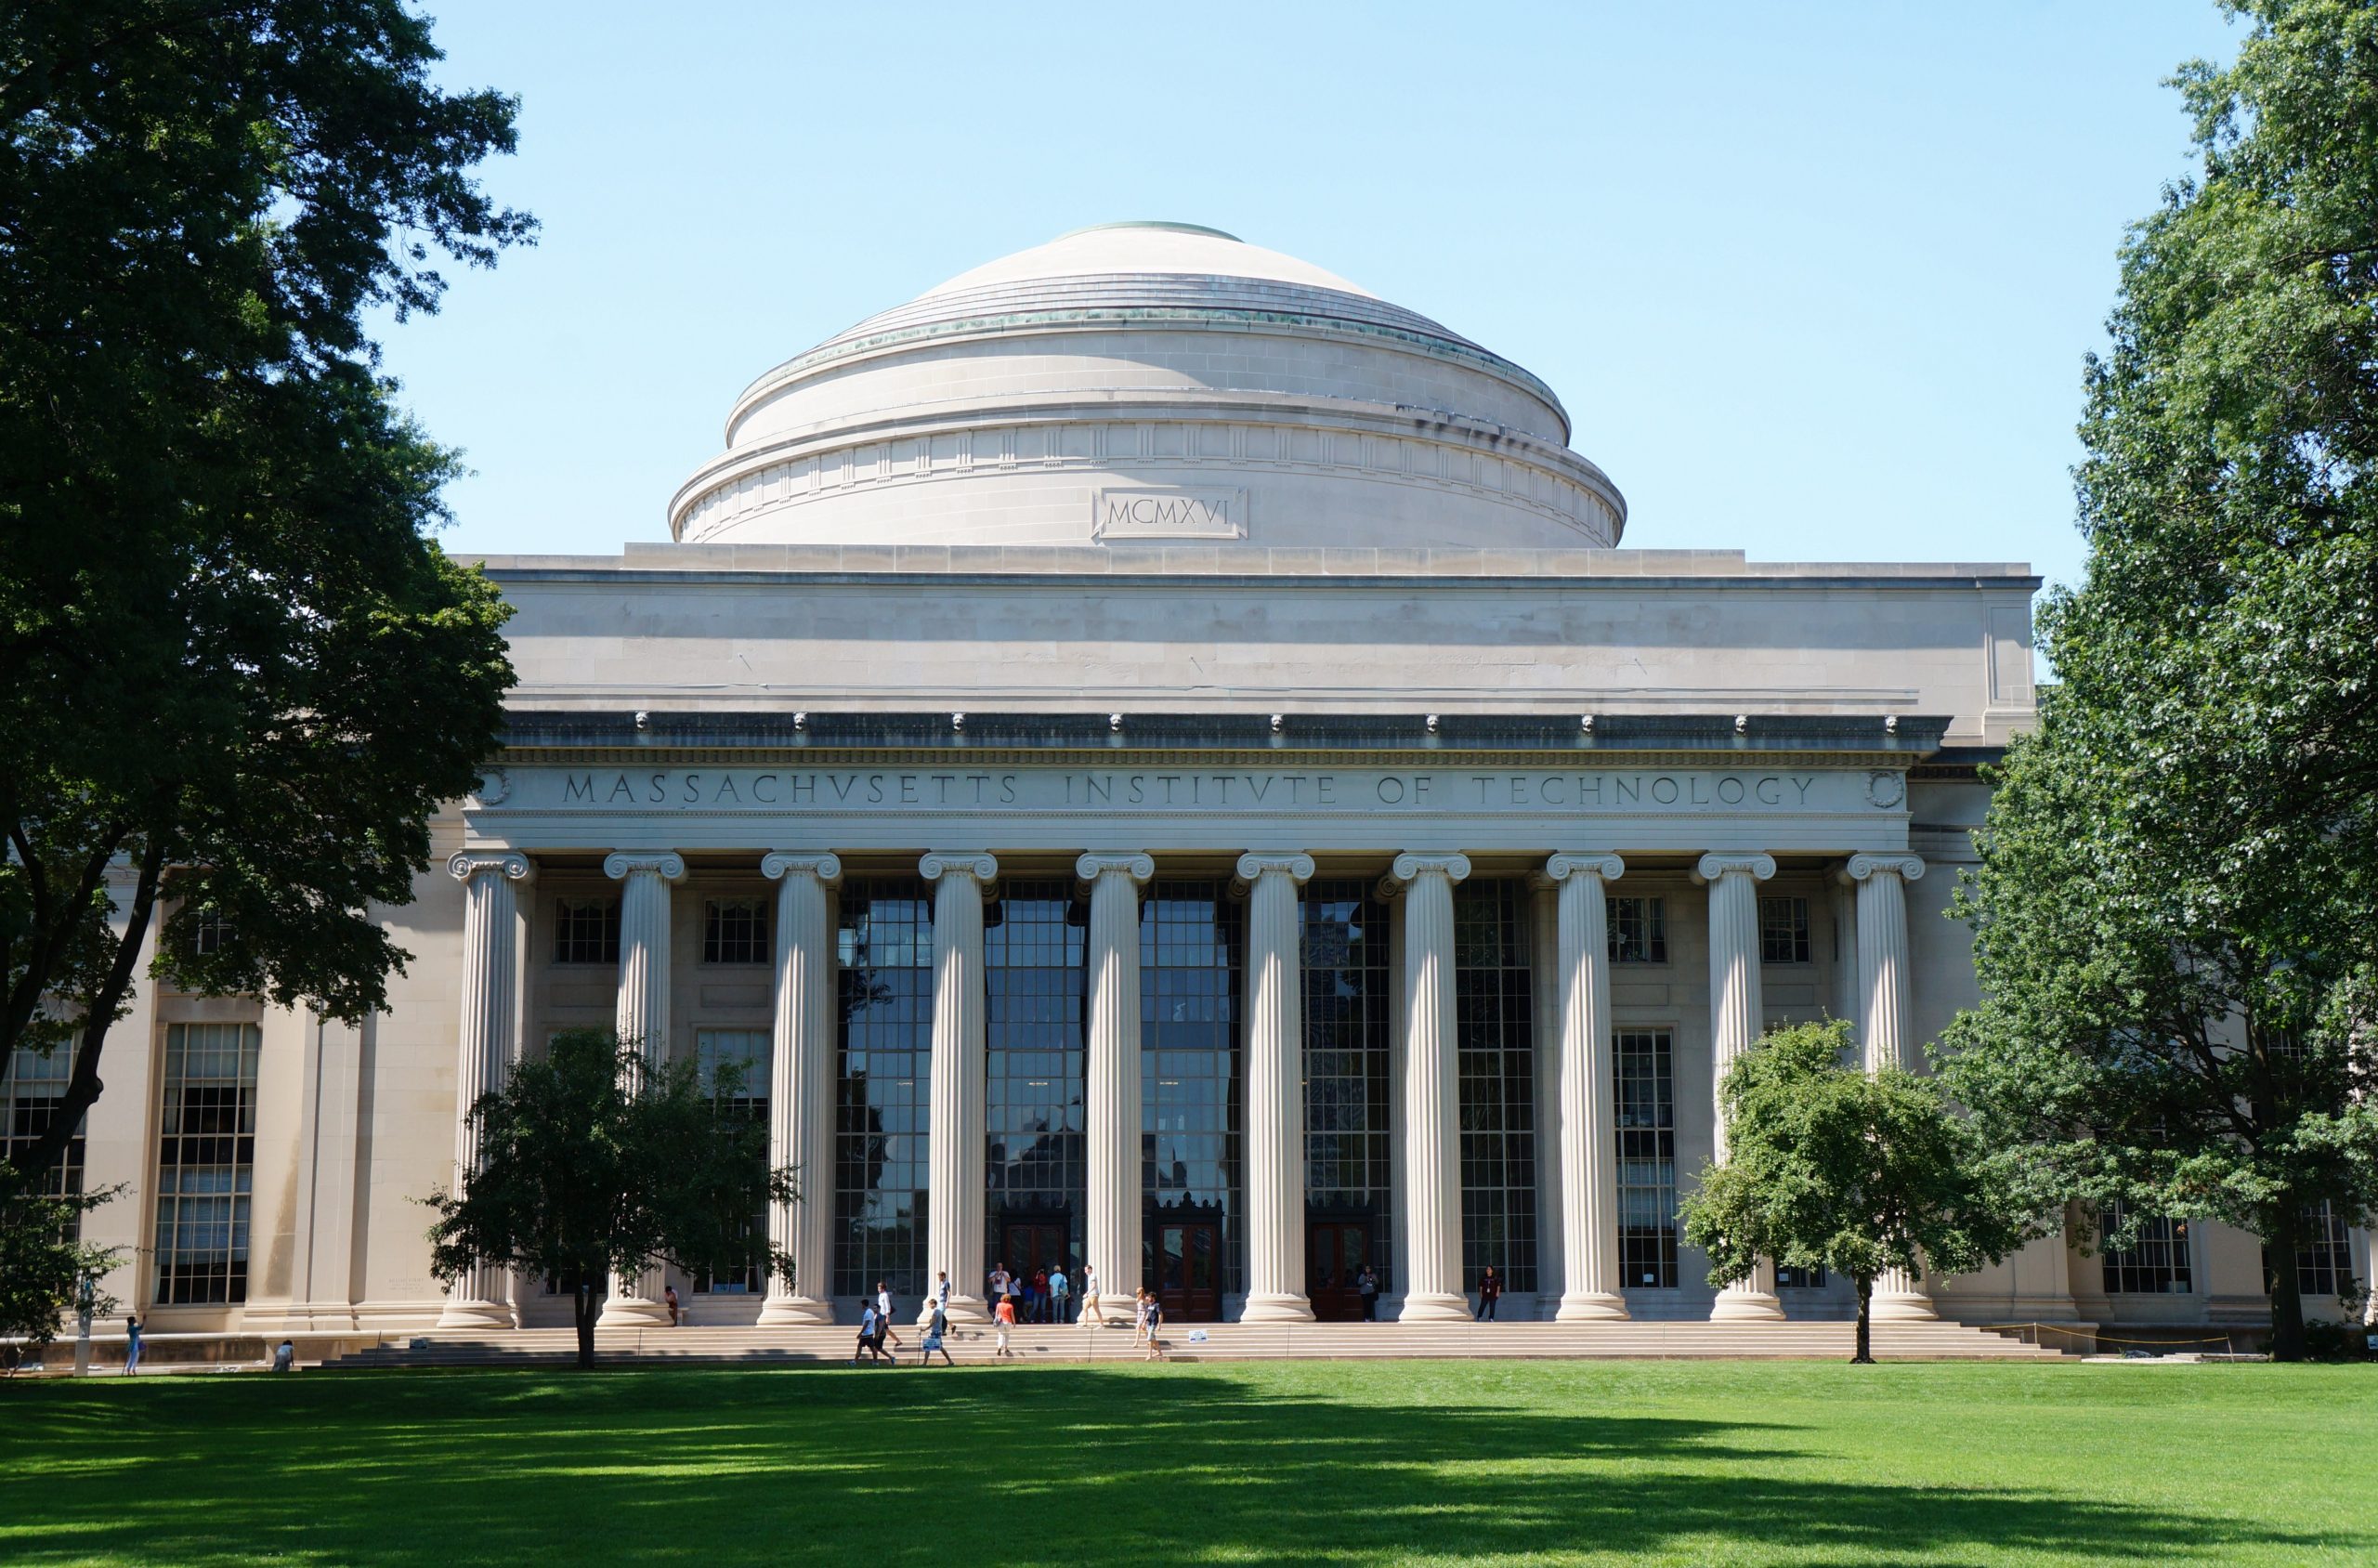 MIT Under Fire: Discriminating Practices Brought to Light